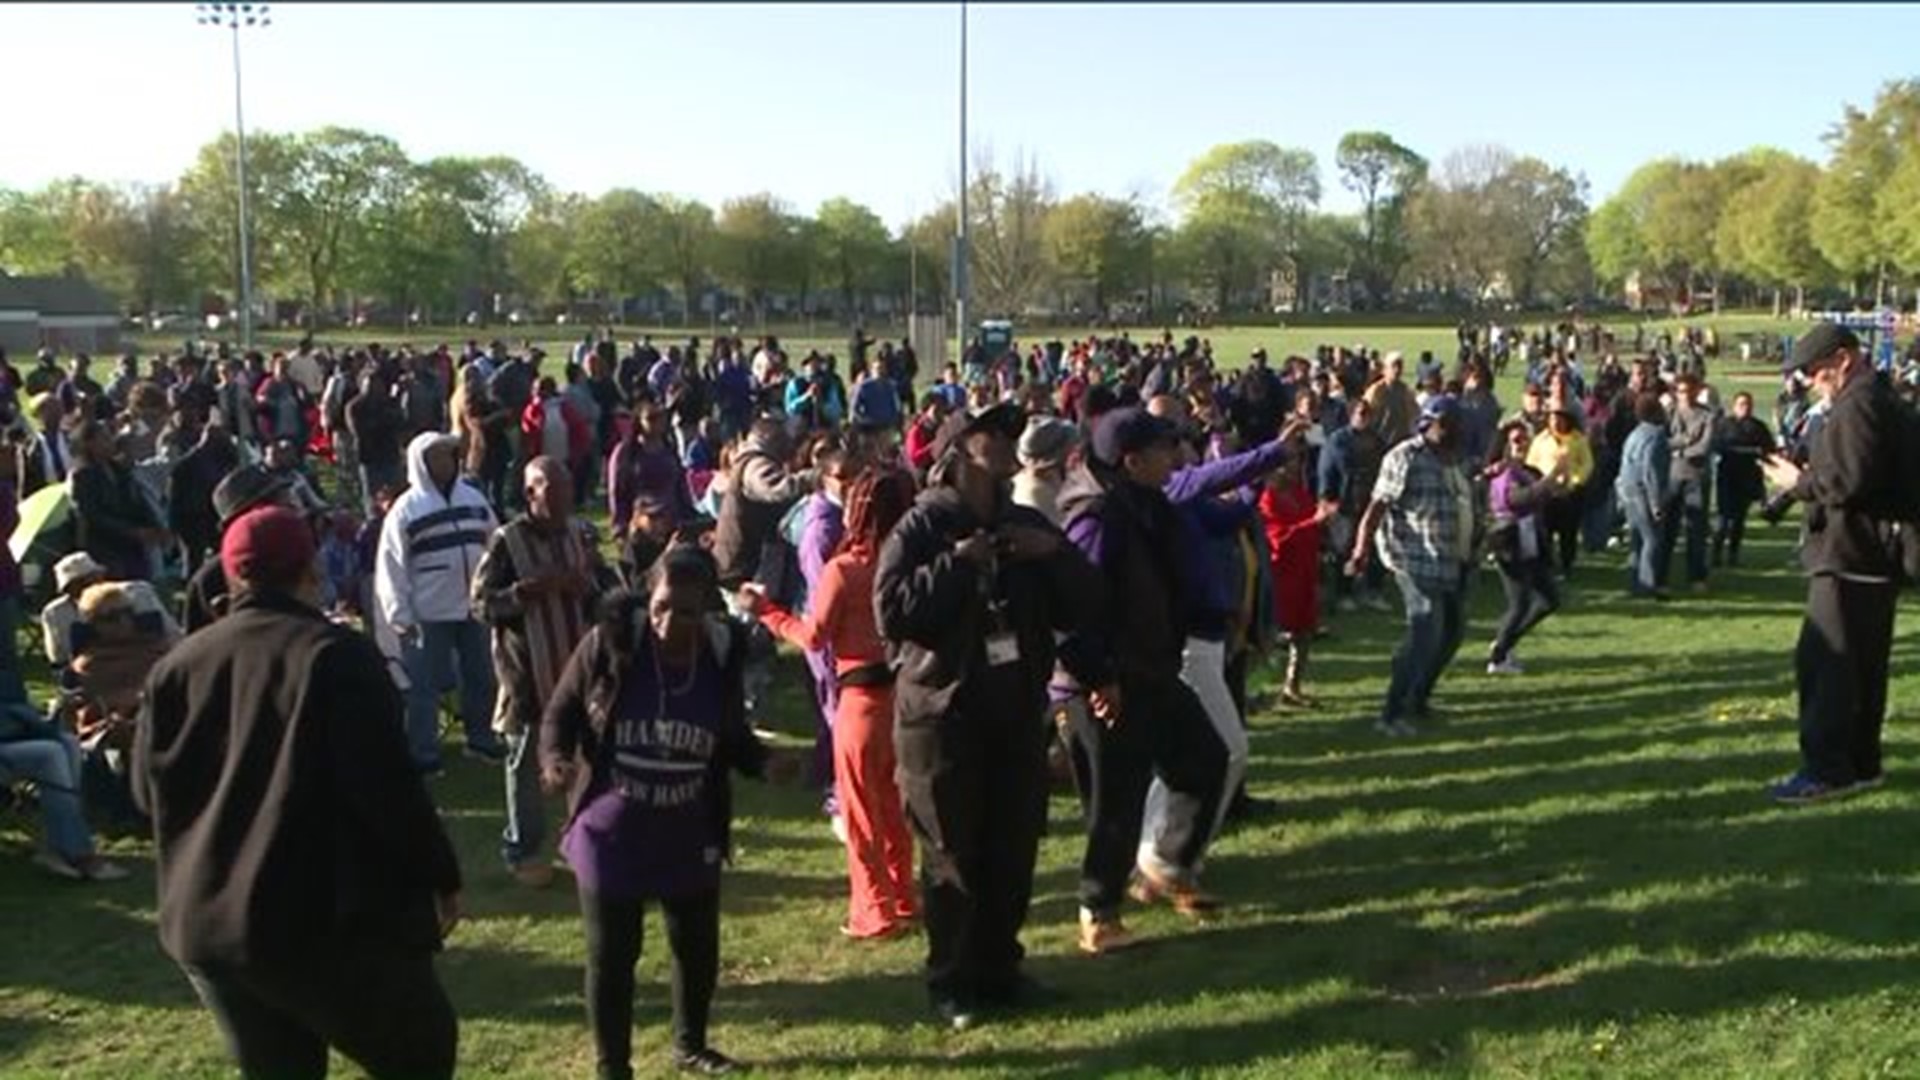 Prince fans join together for dance party in New Haven